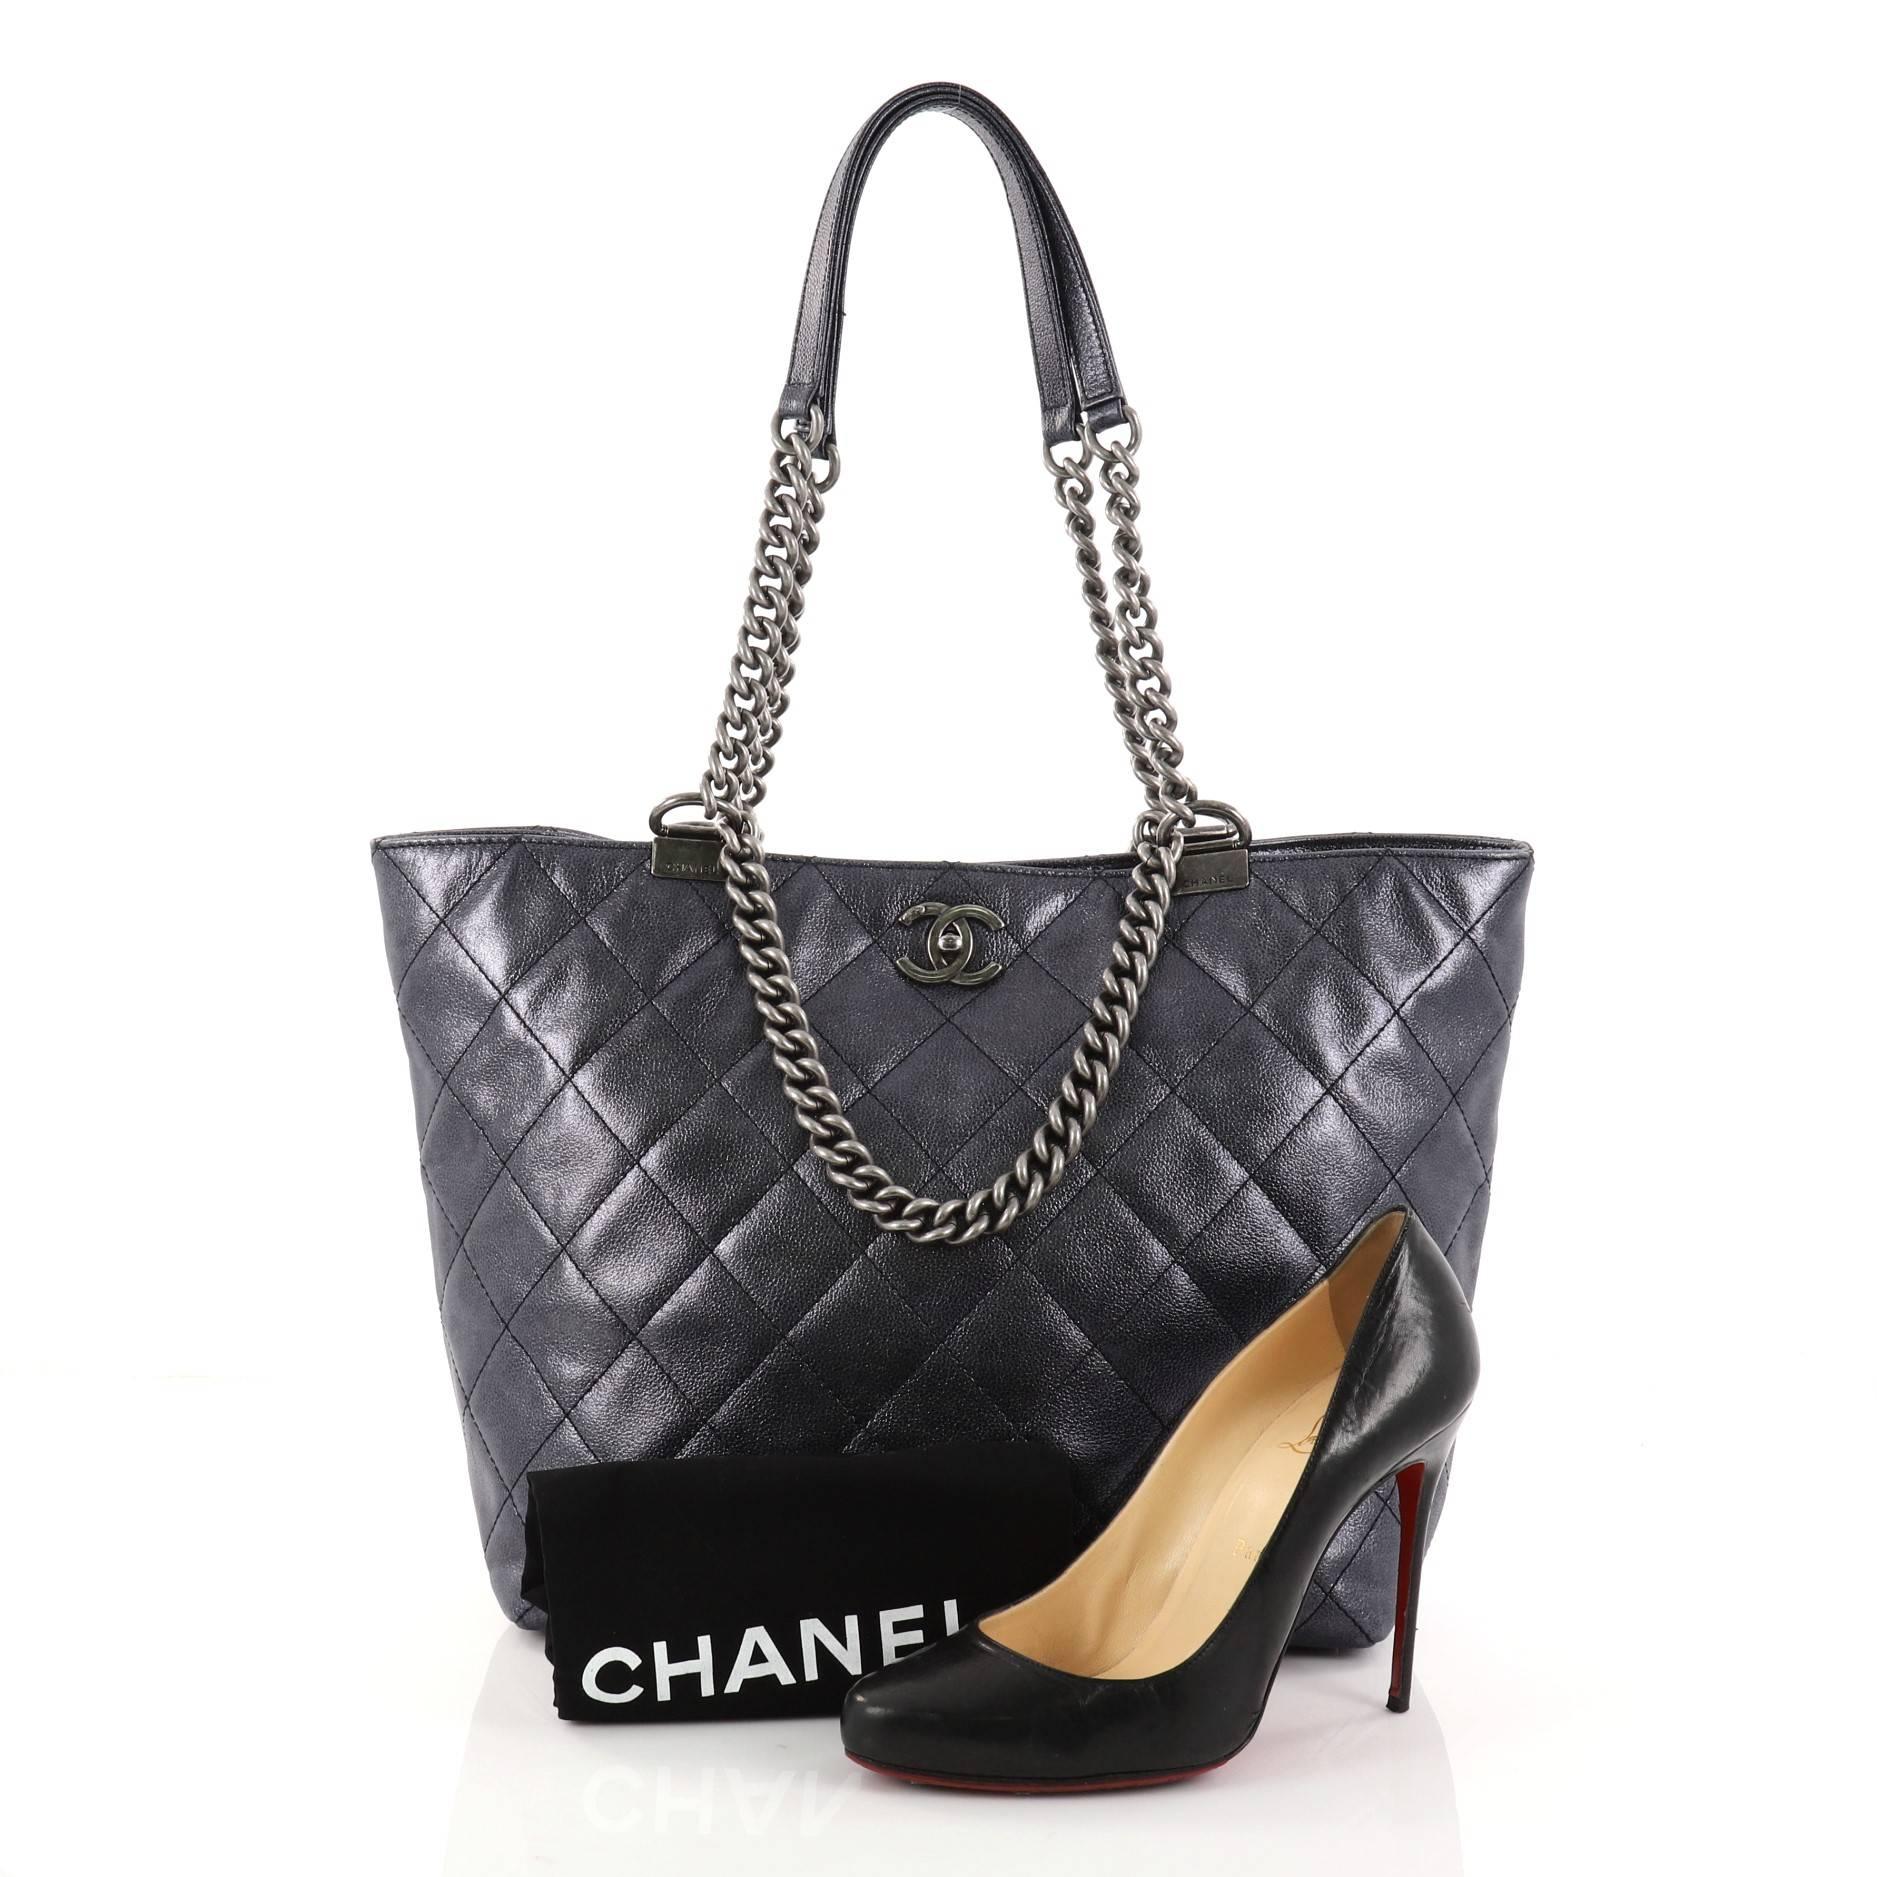 This authentic Chanel Shopping In Chains Tote Quilted Calfskin Large is the perfect luxe companion for the modern woman. Crafted in blue quilted metallic calfskin, this simple yet elegant tote features shoulder straps with aged silver chunky chain